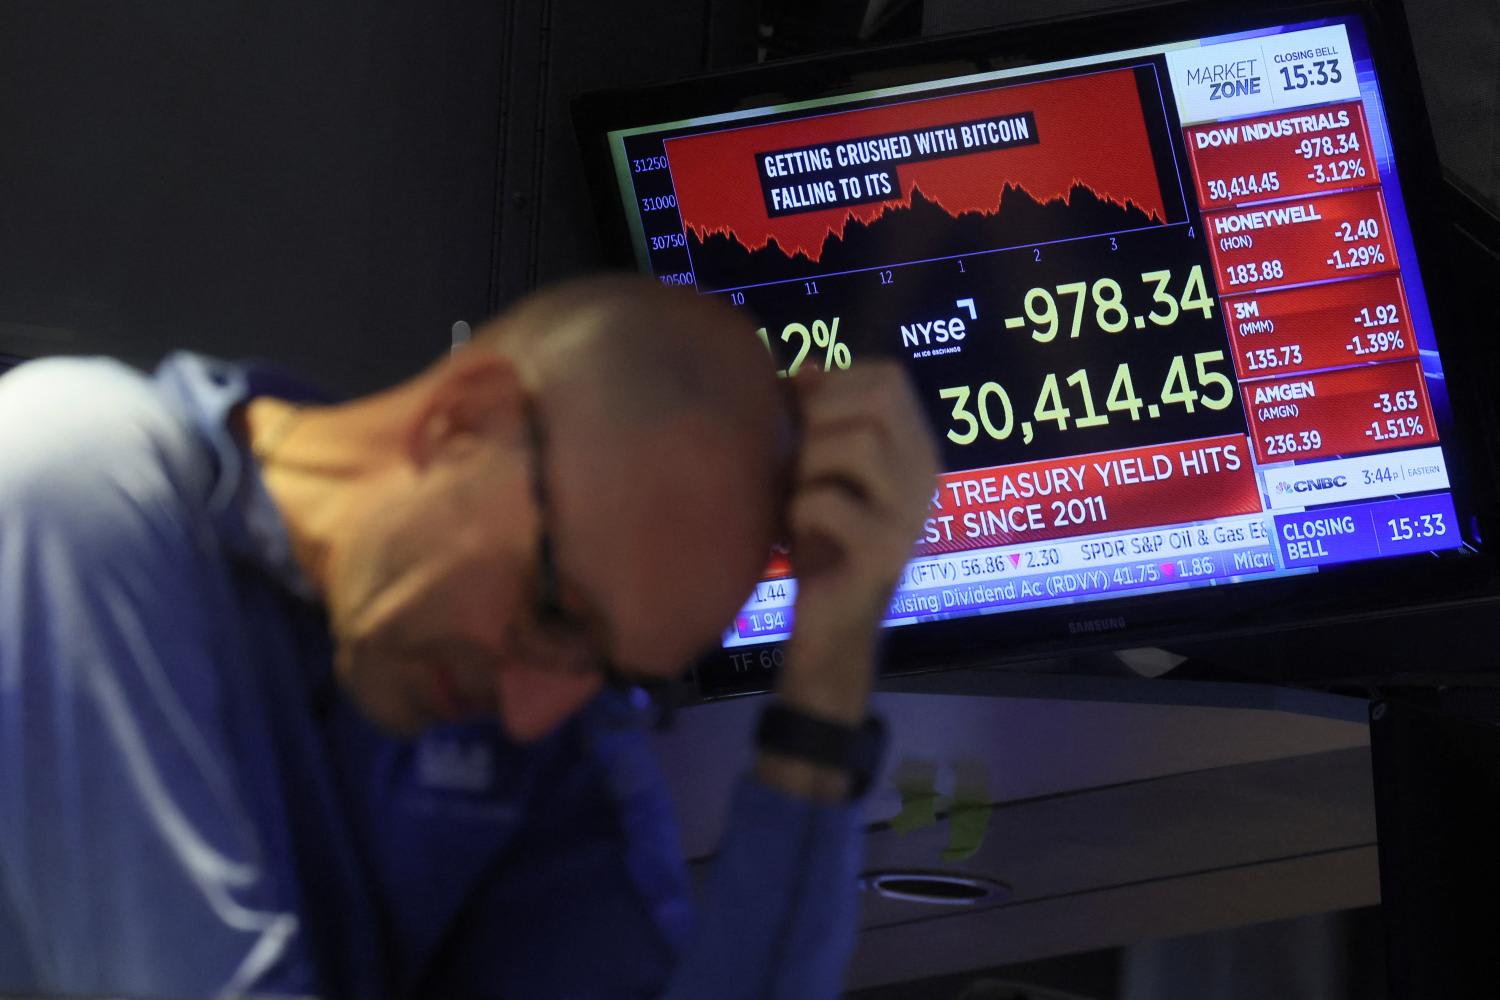 A trader works on the floor of the New York Stock Exchange (NYSE) in New York City, on June 13, 2022